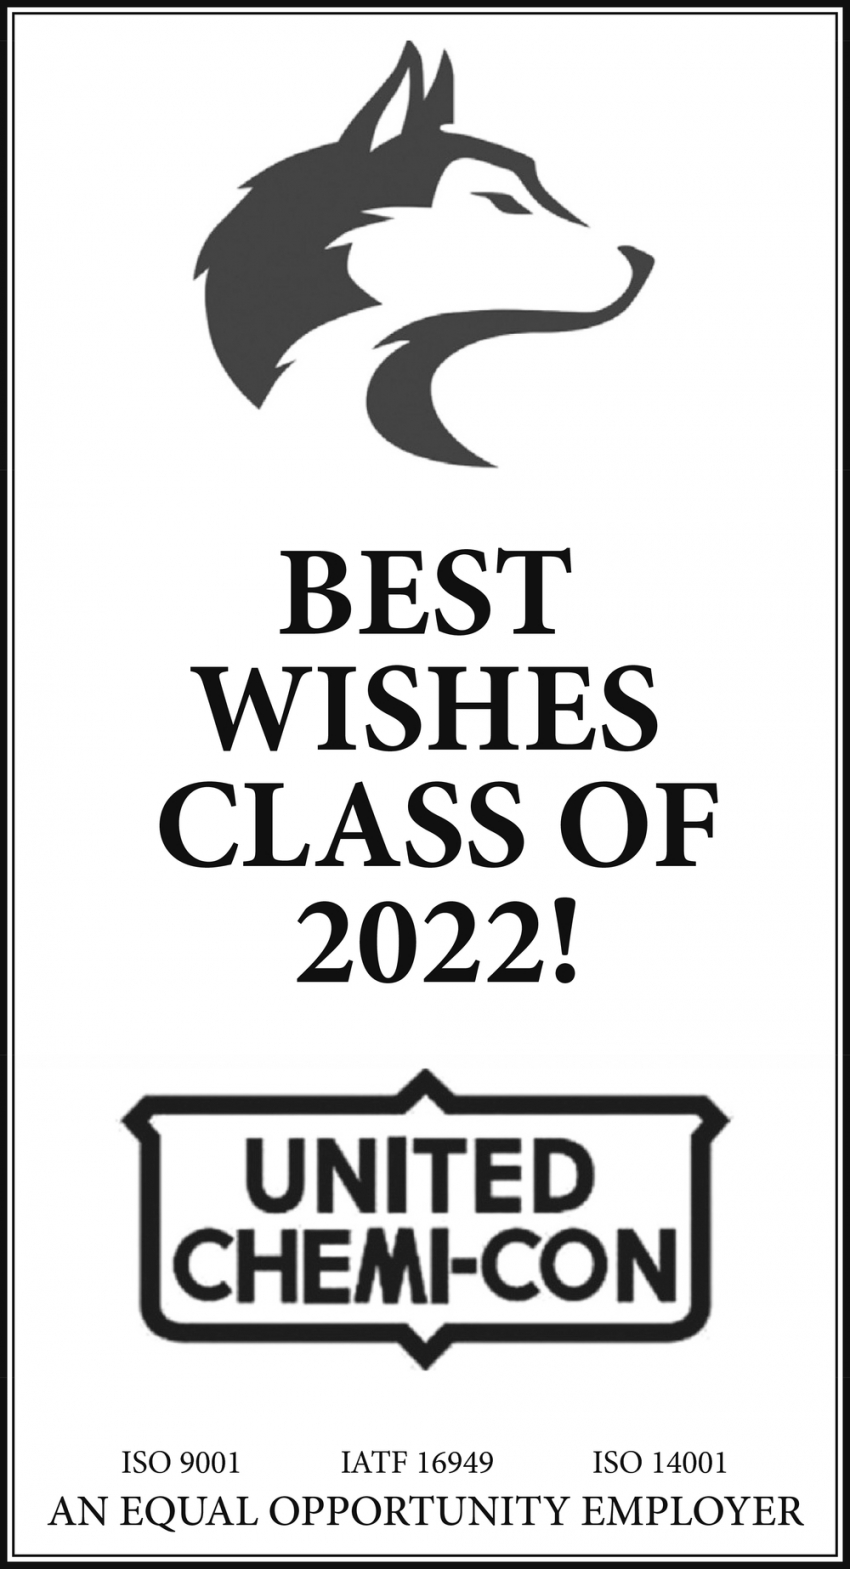 Best Wishes Class of 2022!